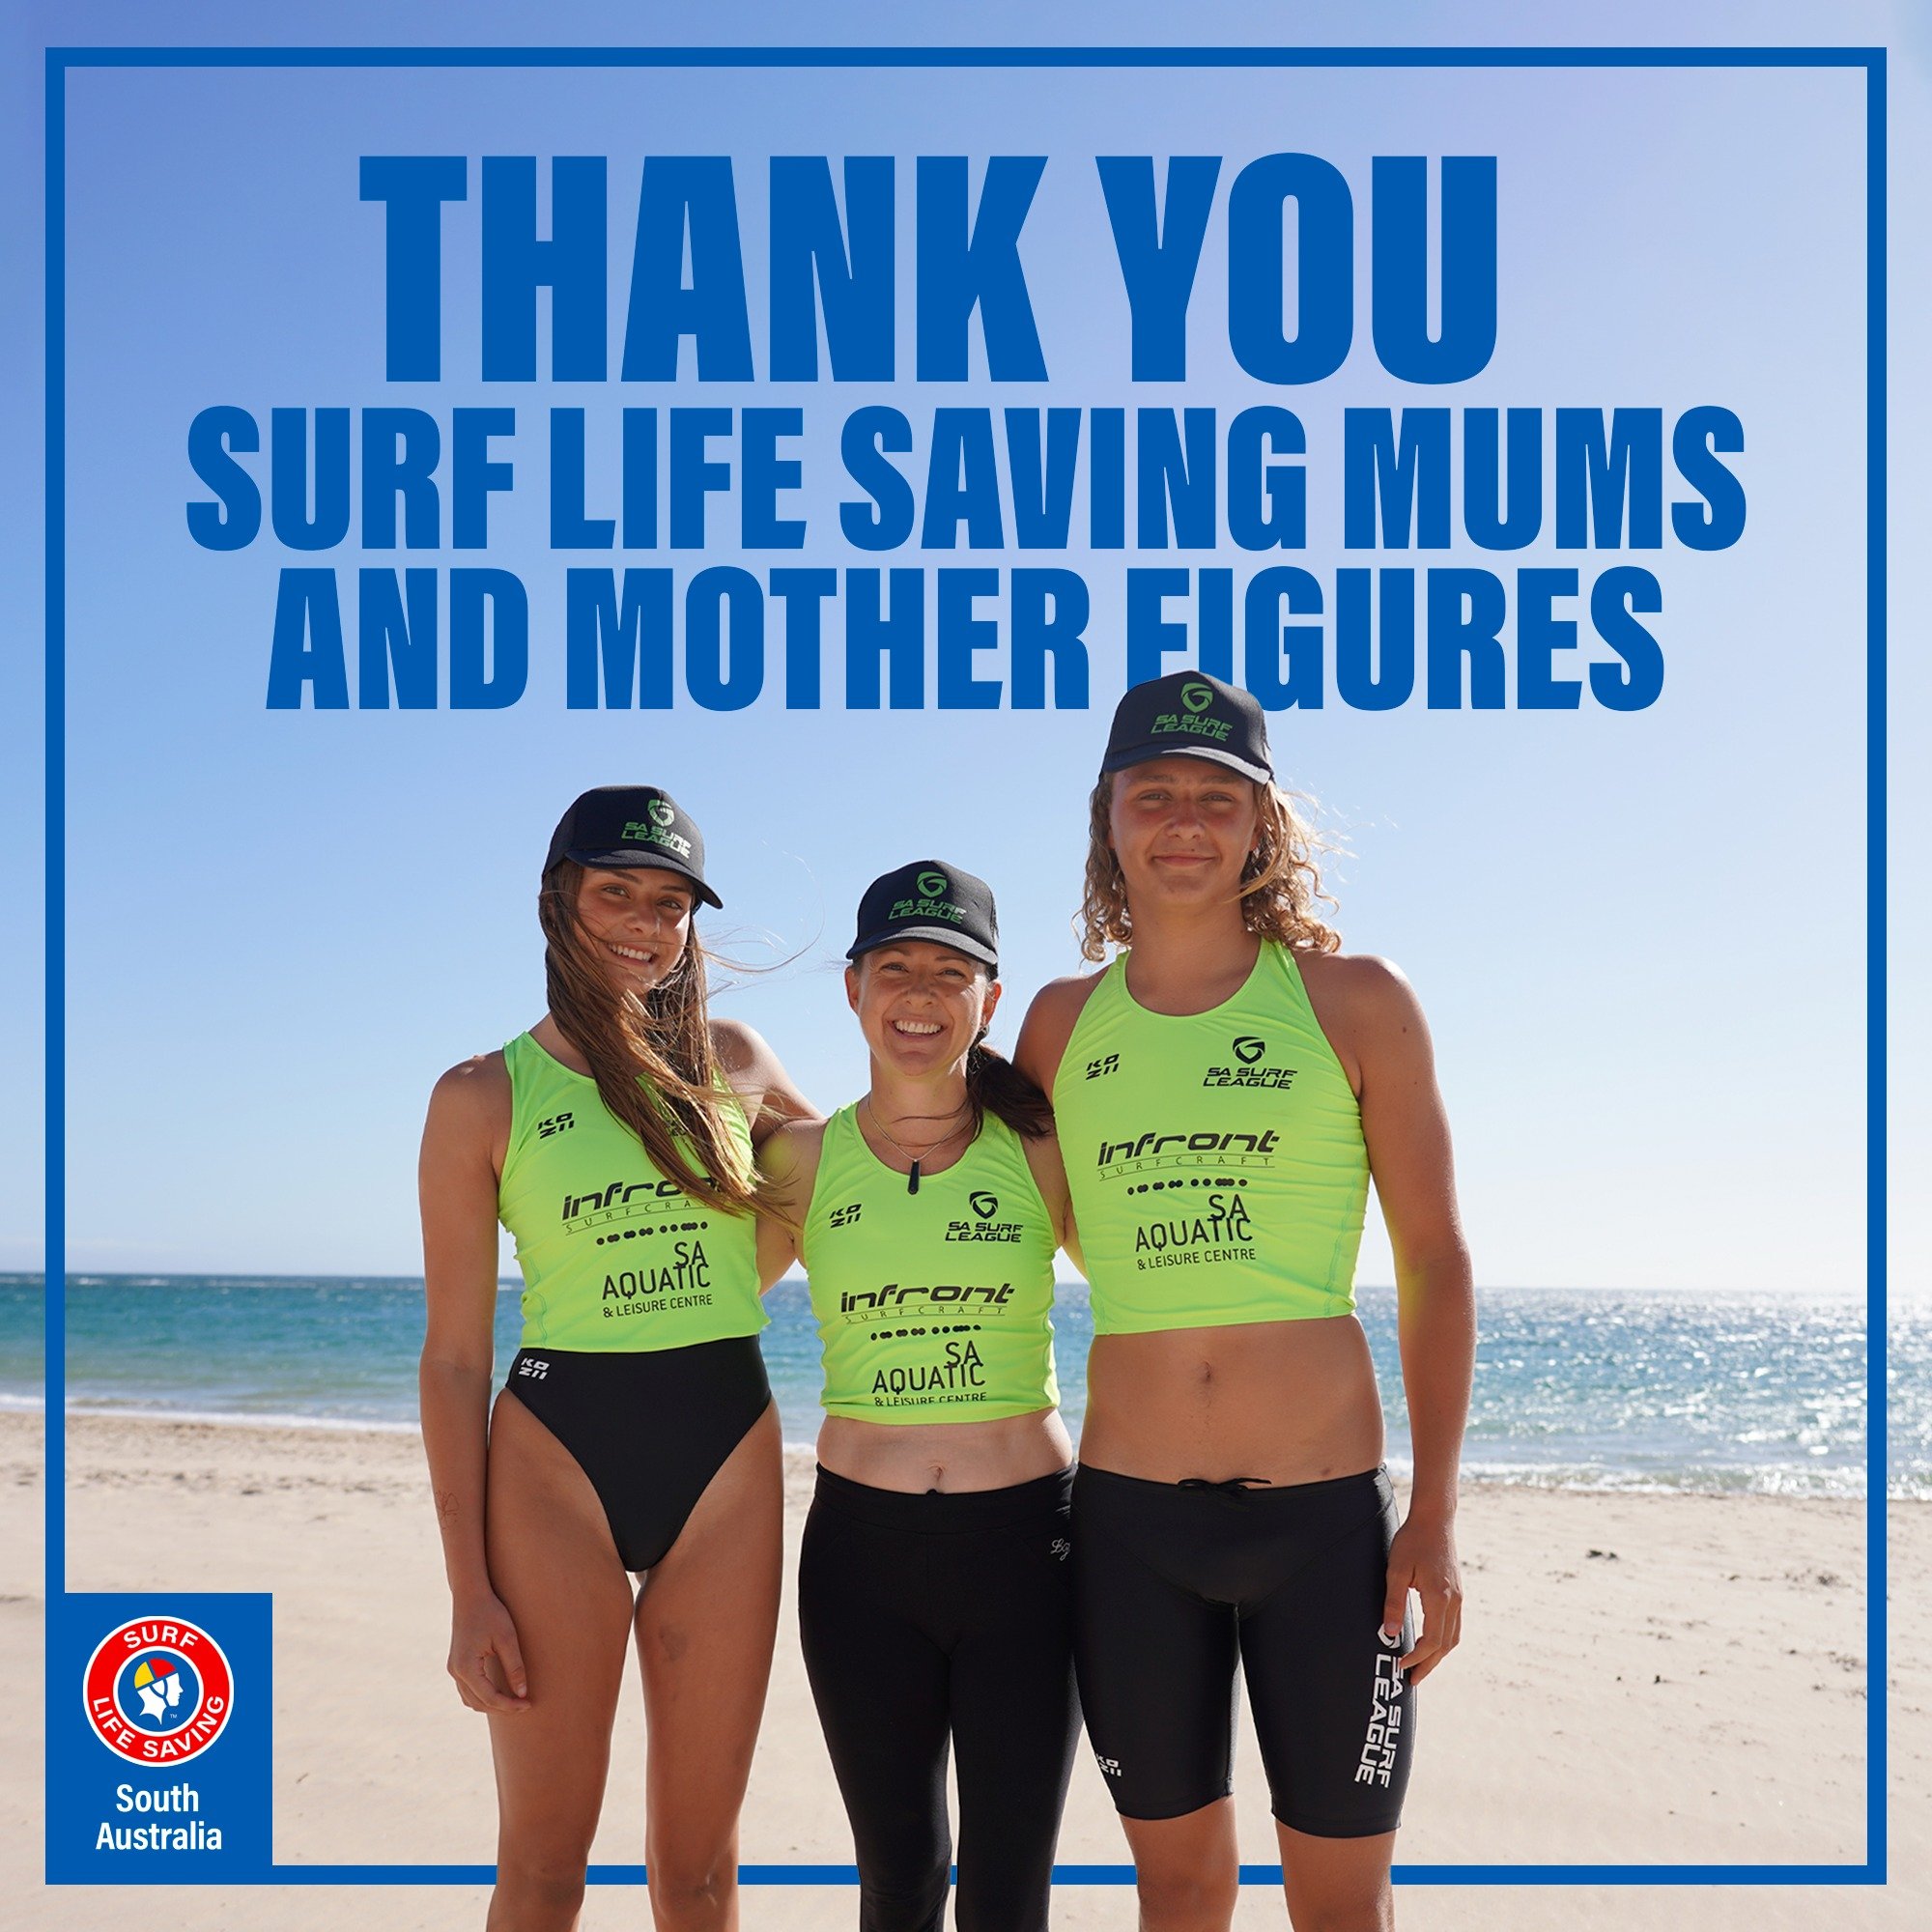 Happy Mother's Day to all the incredible mums, grandmas, mother figures and mentors in our Surf Life Saving family. Our hearts are full of love ❤💛

We also understand that while this day is wonderful for some, it can be difficult for others. So we a